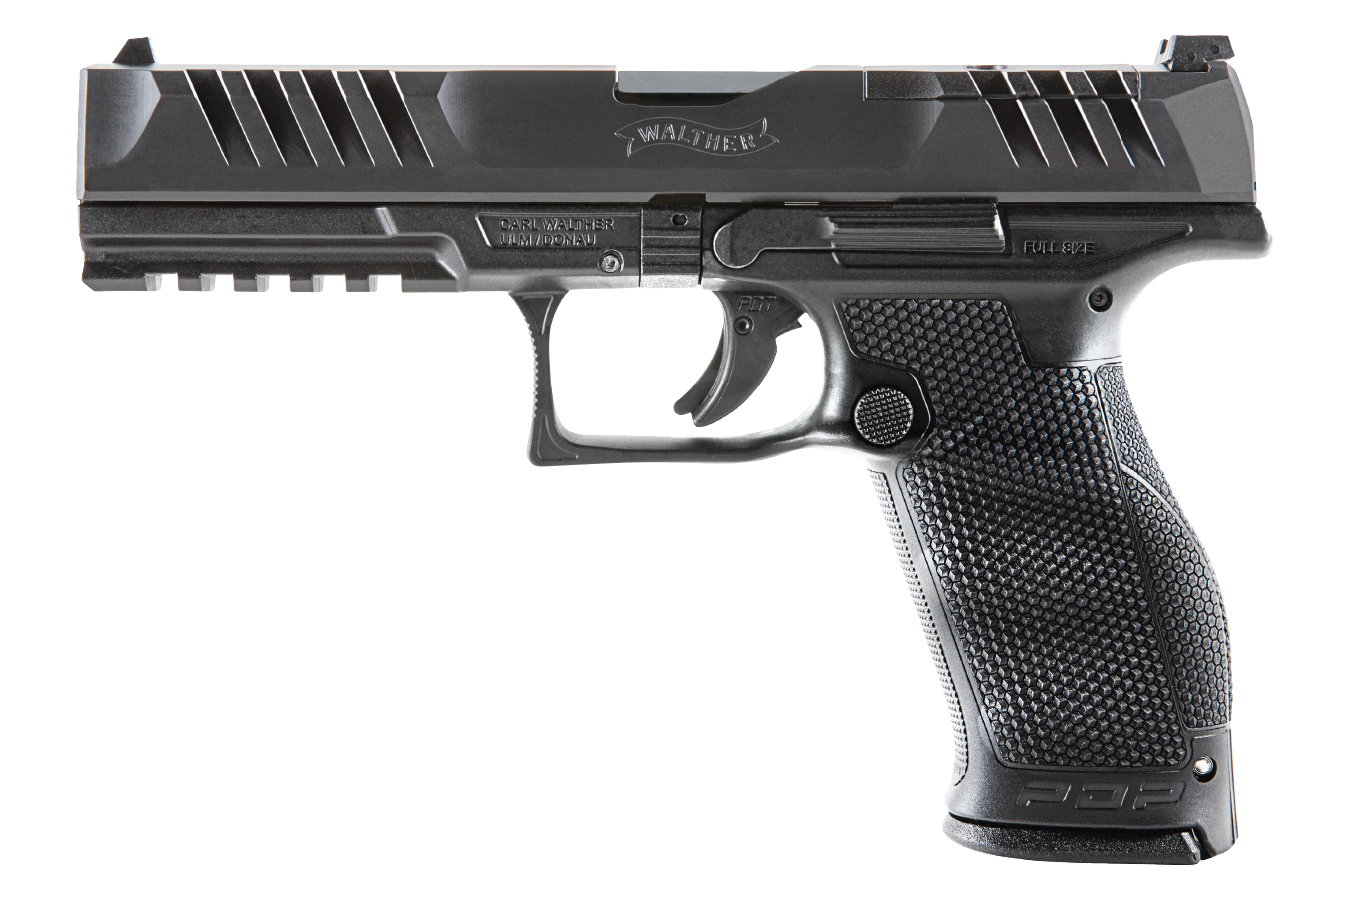 PDP FULL-SIZE OPTICS READY STRIKER-FIRED PISTOL WITH 5 INCH BARREL AND TRITIUM S